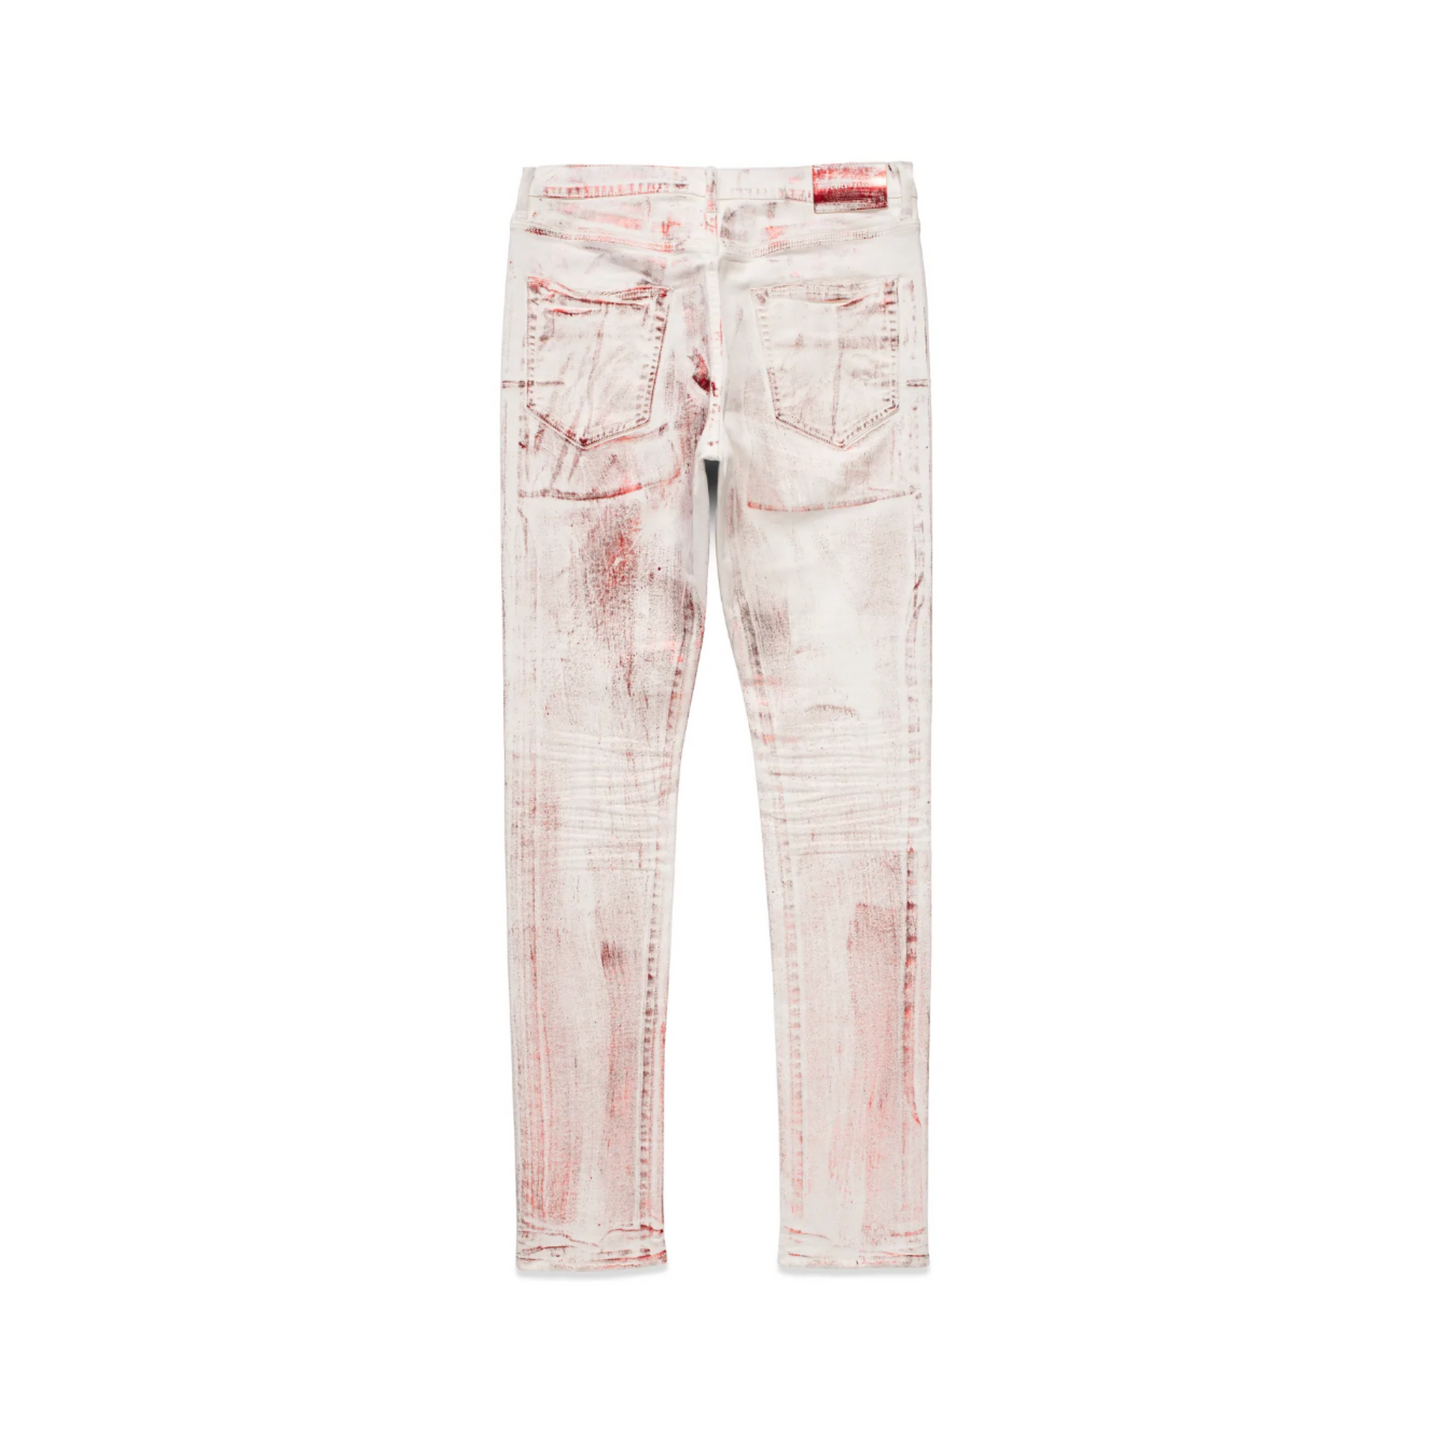 PURPLE BRAND LOW RISE SKINNY JEAN WHITE X RAY WITH CHERRY TOMATO FOIL